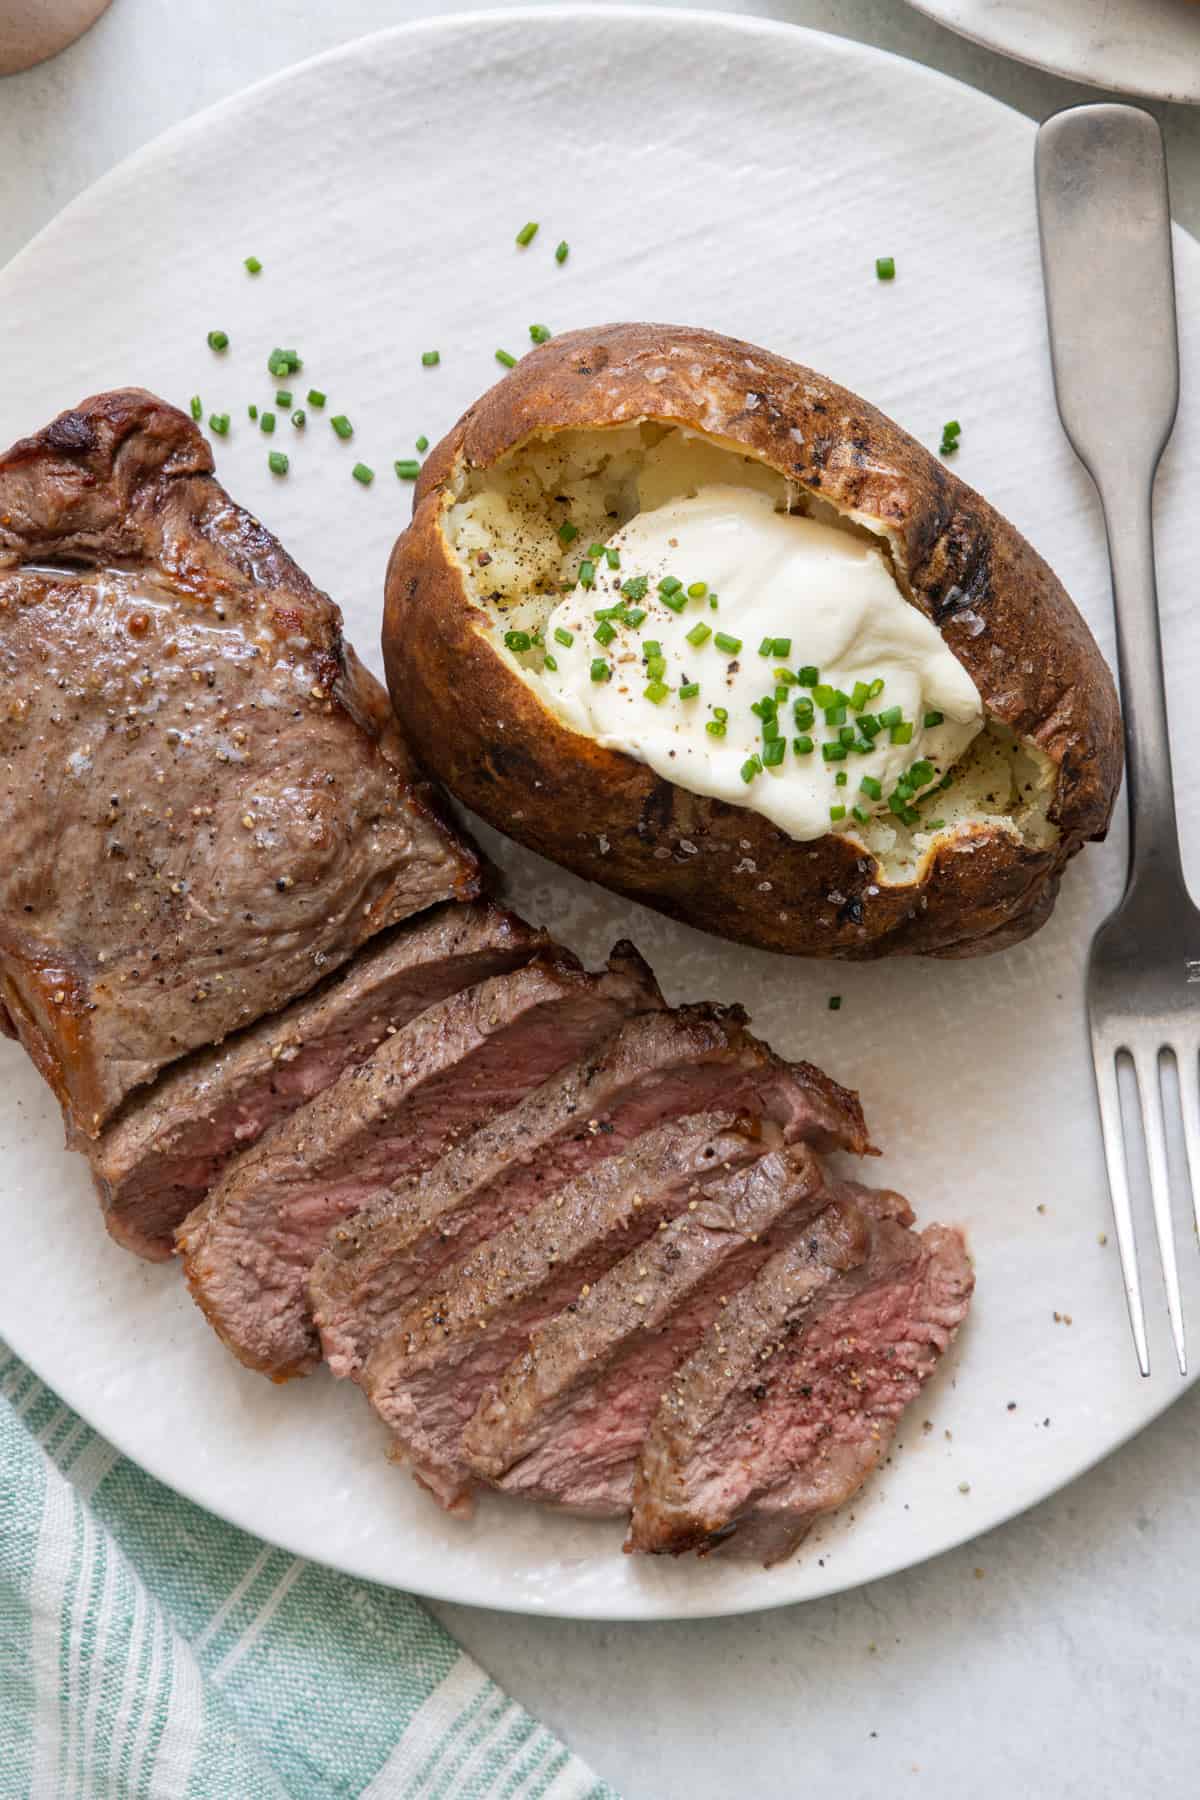 Air fryer baked potato topped with butter and chives on plate with a steak filet sliced halfway.